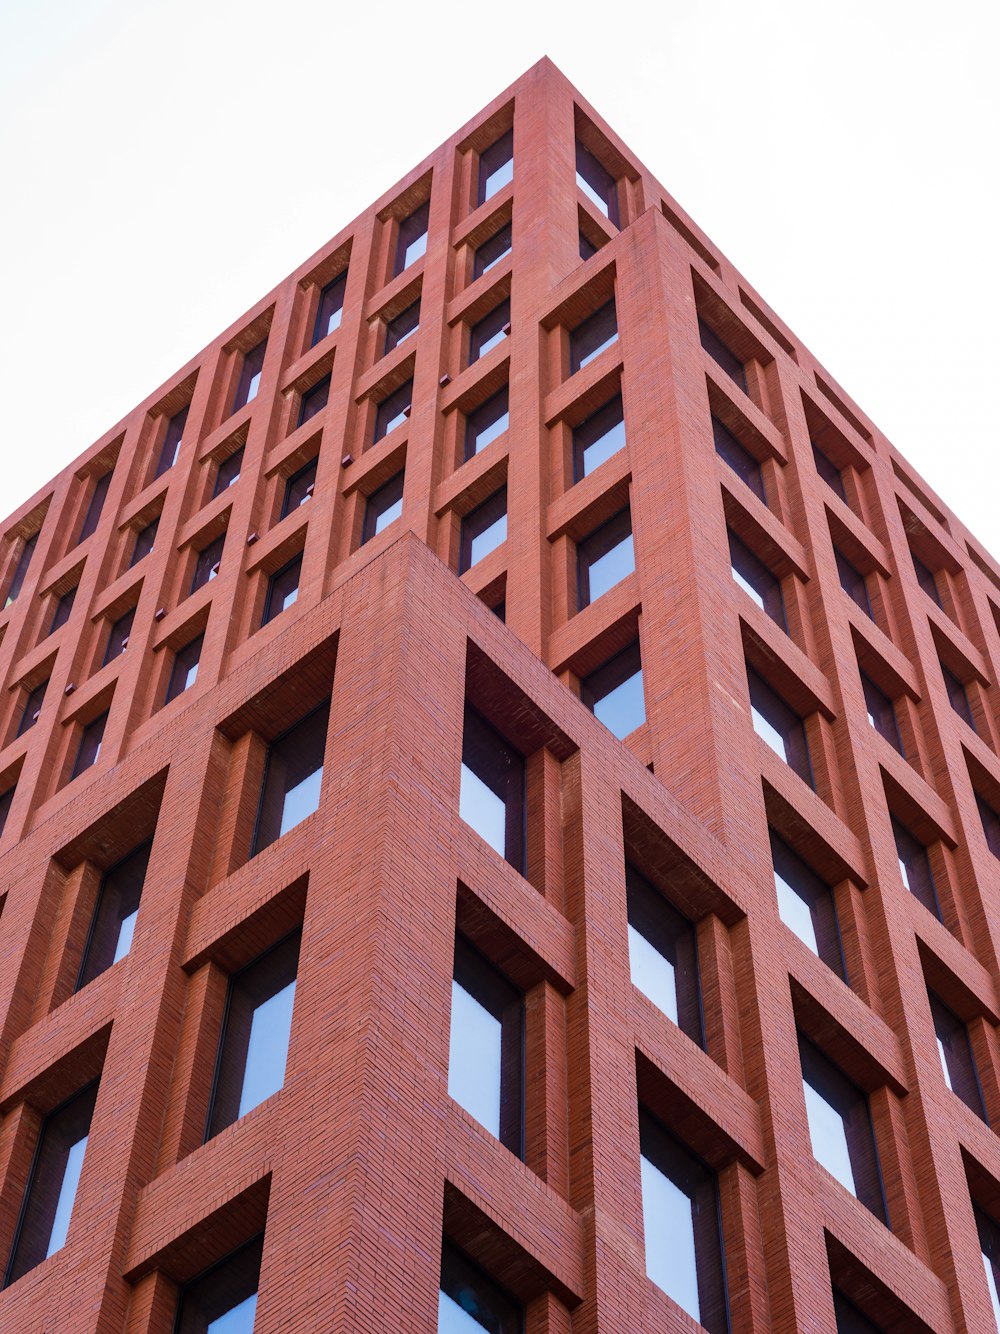 a tall red building with lots of windows